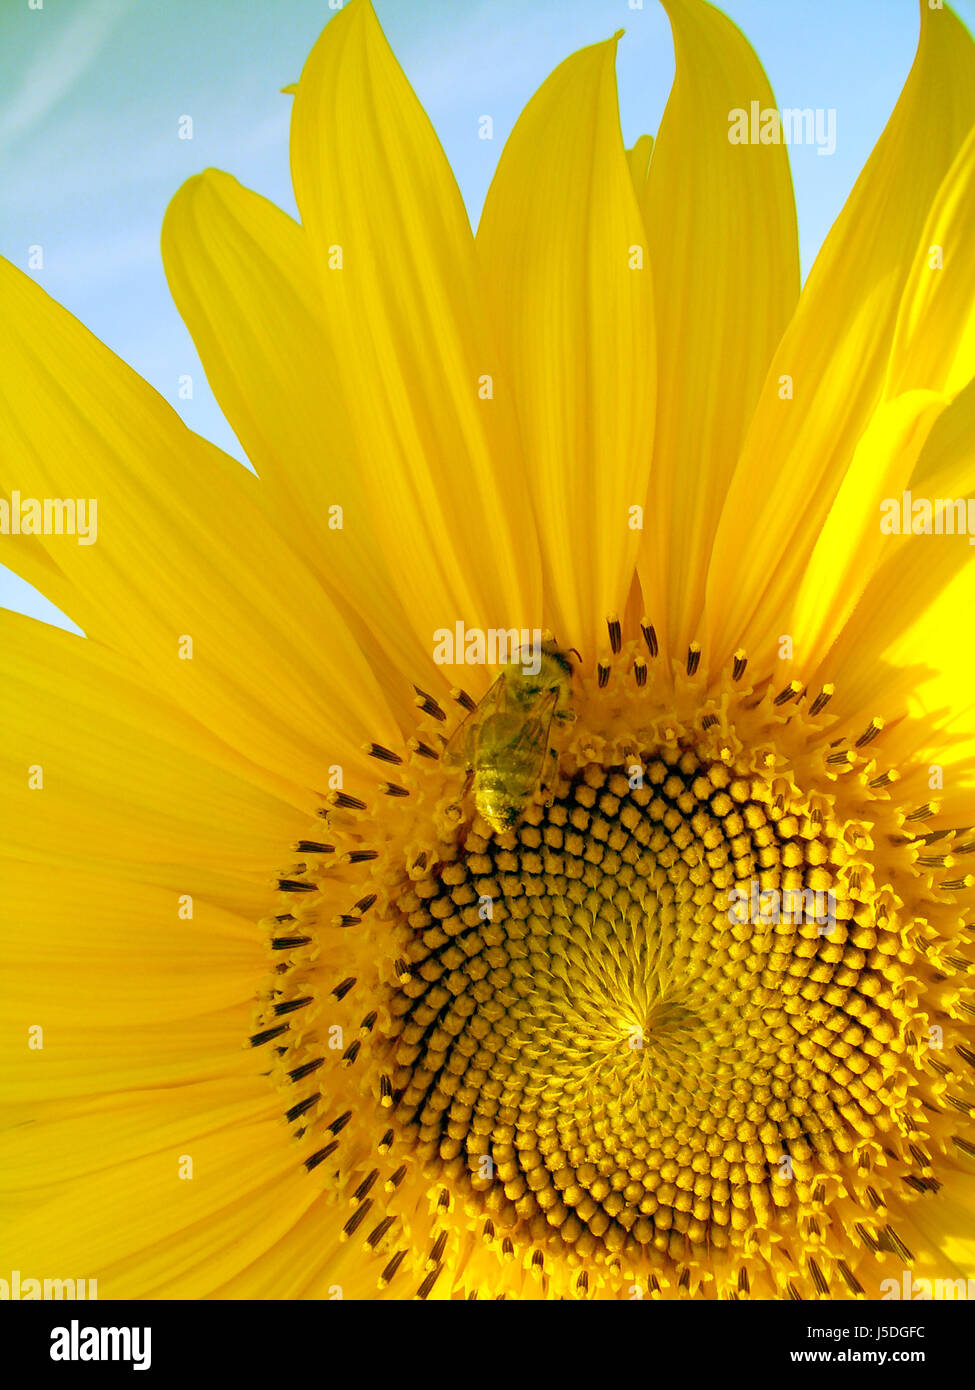 flower,sunflower,plant,wasp,petal,hand,firmament,sky,yellow,insect,bee,sunflower Stock Photo